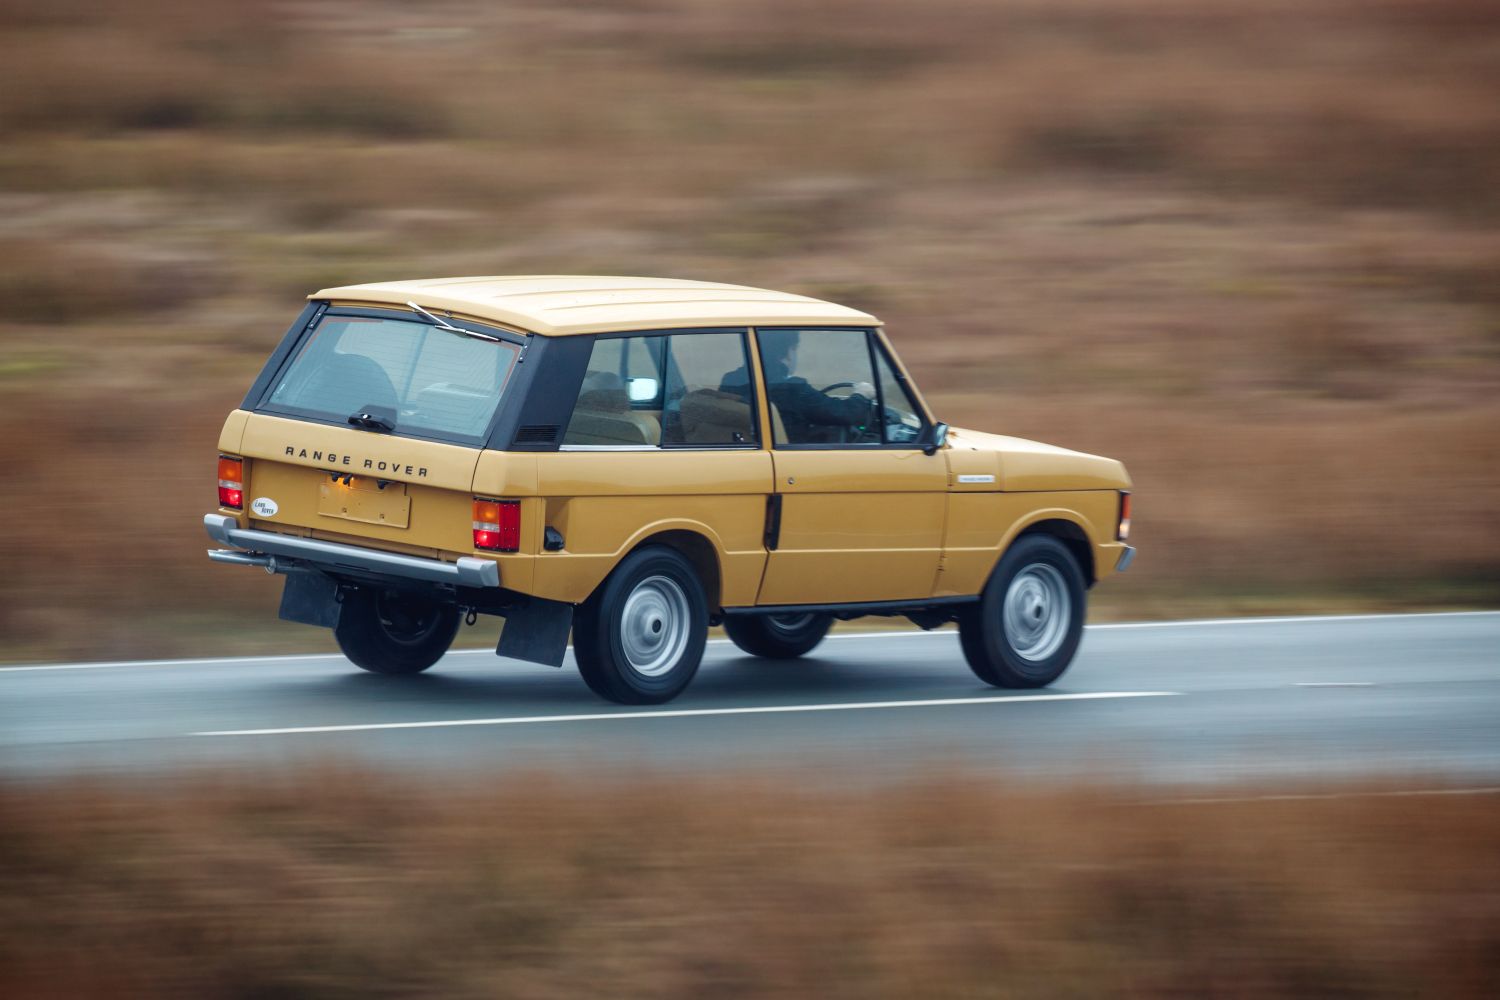 <p>From 1970 to 1981, the Range Rover was simply viewed as a larger, roomier alternative to the Land Rover. In this era, four-wheel-drive vehicles were expected to be rugged and capable, prioritizing off-road prowess over any thought of luxury. For the first 11 years of production, the Range Rover was only available as a two-door, with very few luxury appointments, a four-speed manual transmission, and an interior made of durable vinyl and plastics. The vehicle was technologically revolutionary, using modern coil-spring suspension instead of old-fashioned leaf springs, and offering permanent four-wheel drive and disc brakes front and rear—all of which set it apart from most other four-wheel-drive vehicles of the time. But it would take a few years for the Range Rover to morph into a luxury vehicle.</p>